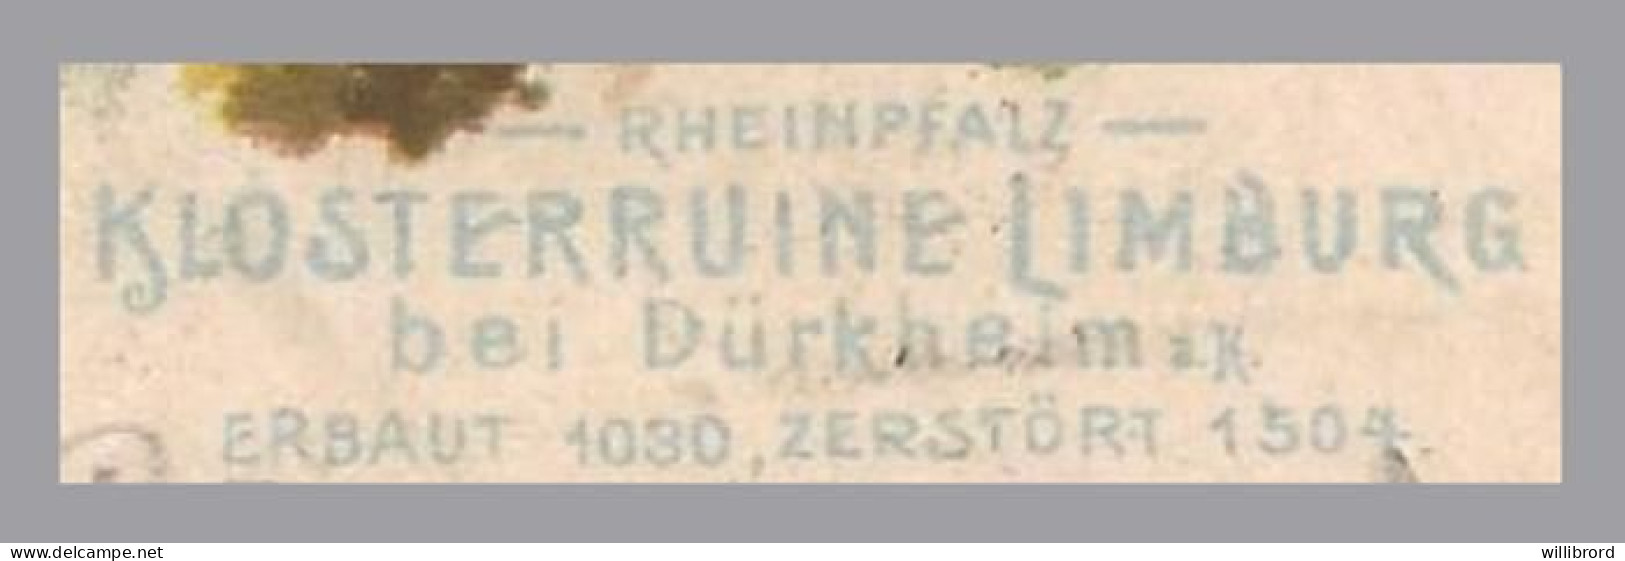 LUXEMBOURG -1900 TWICE REDIRECTED MAIL - Bavaria - Germany - Esch Alzette, Luxembourg - Taxed Cross-border - Strafport